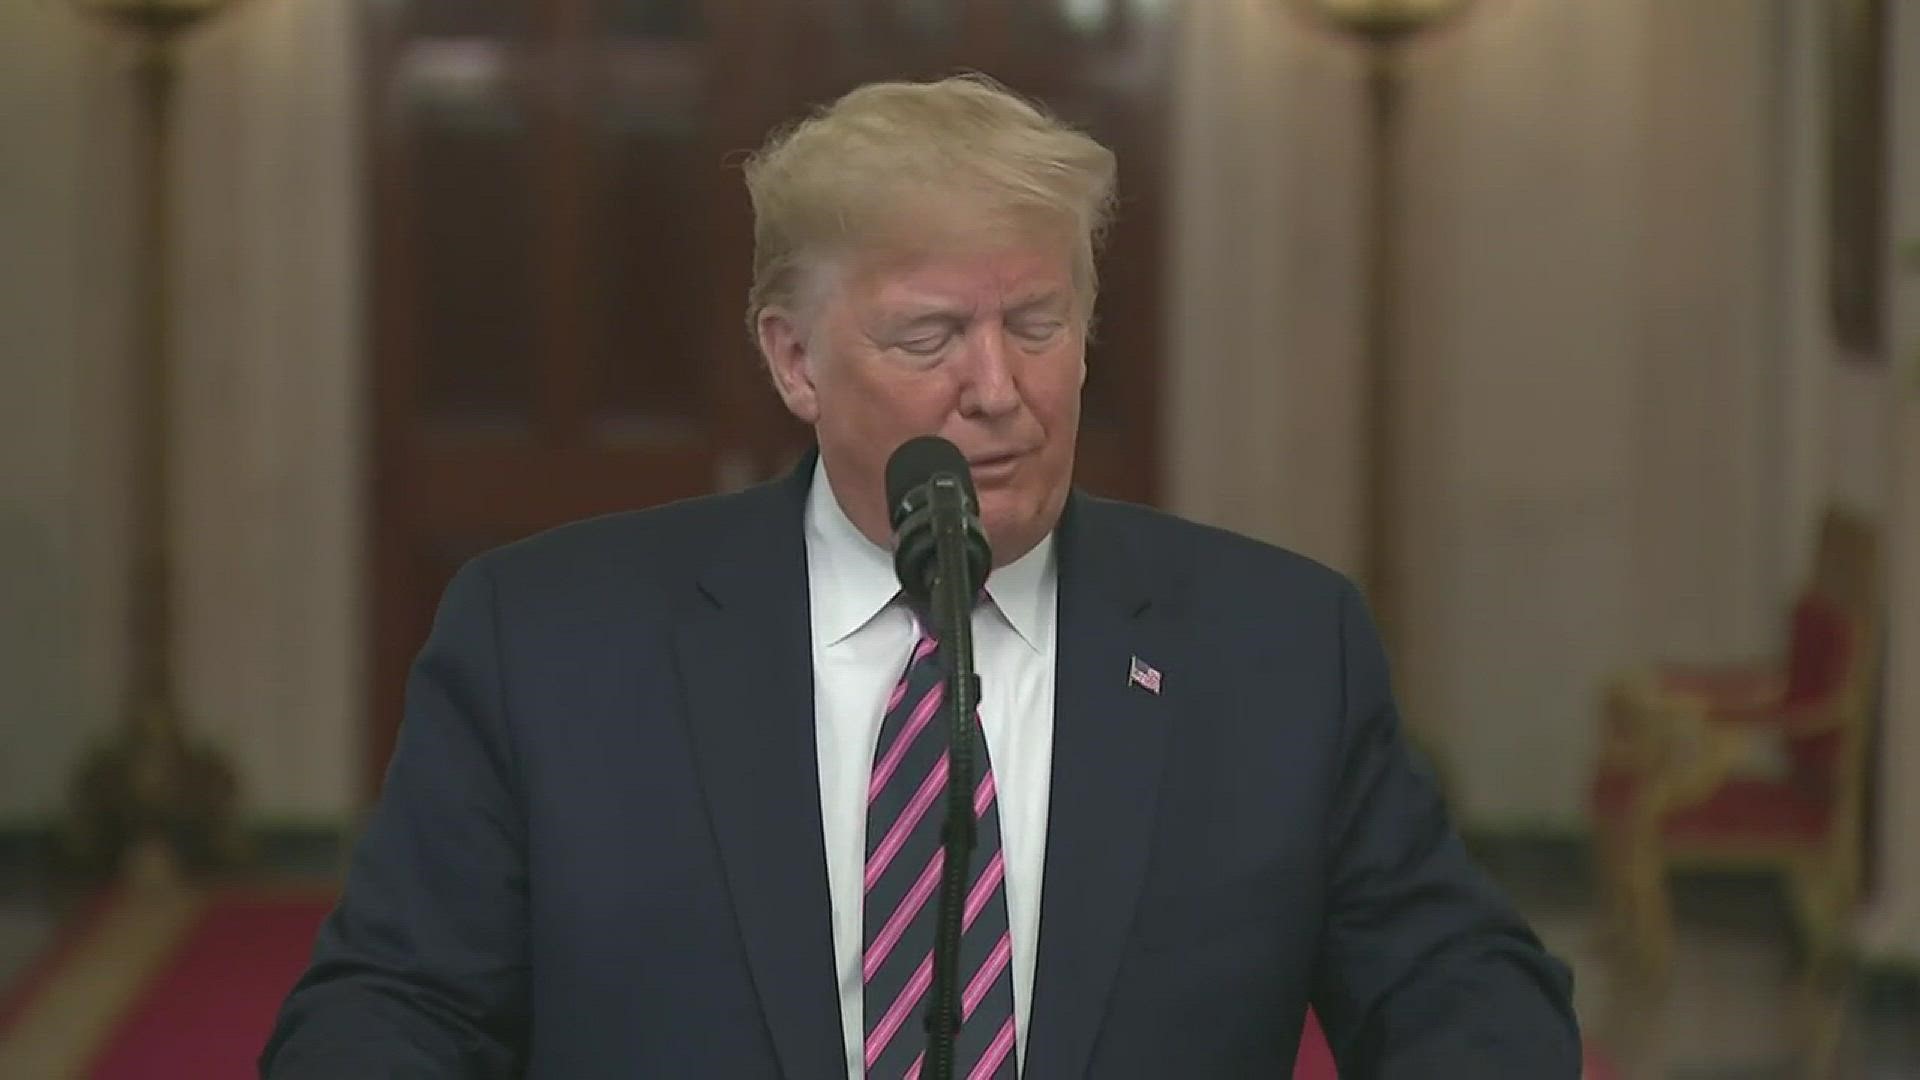 President Donald Trump addressed the nation after his impeachment acquittal. He thanked individuals who helped his throughout the impeachment process.